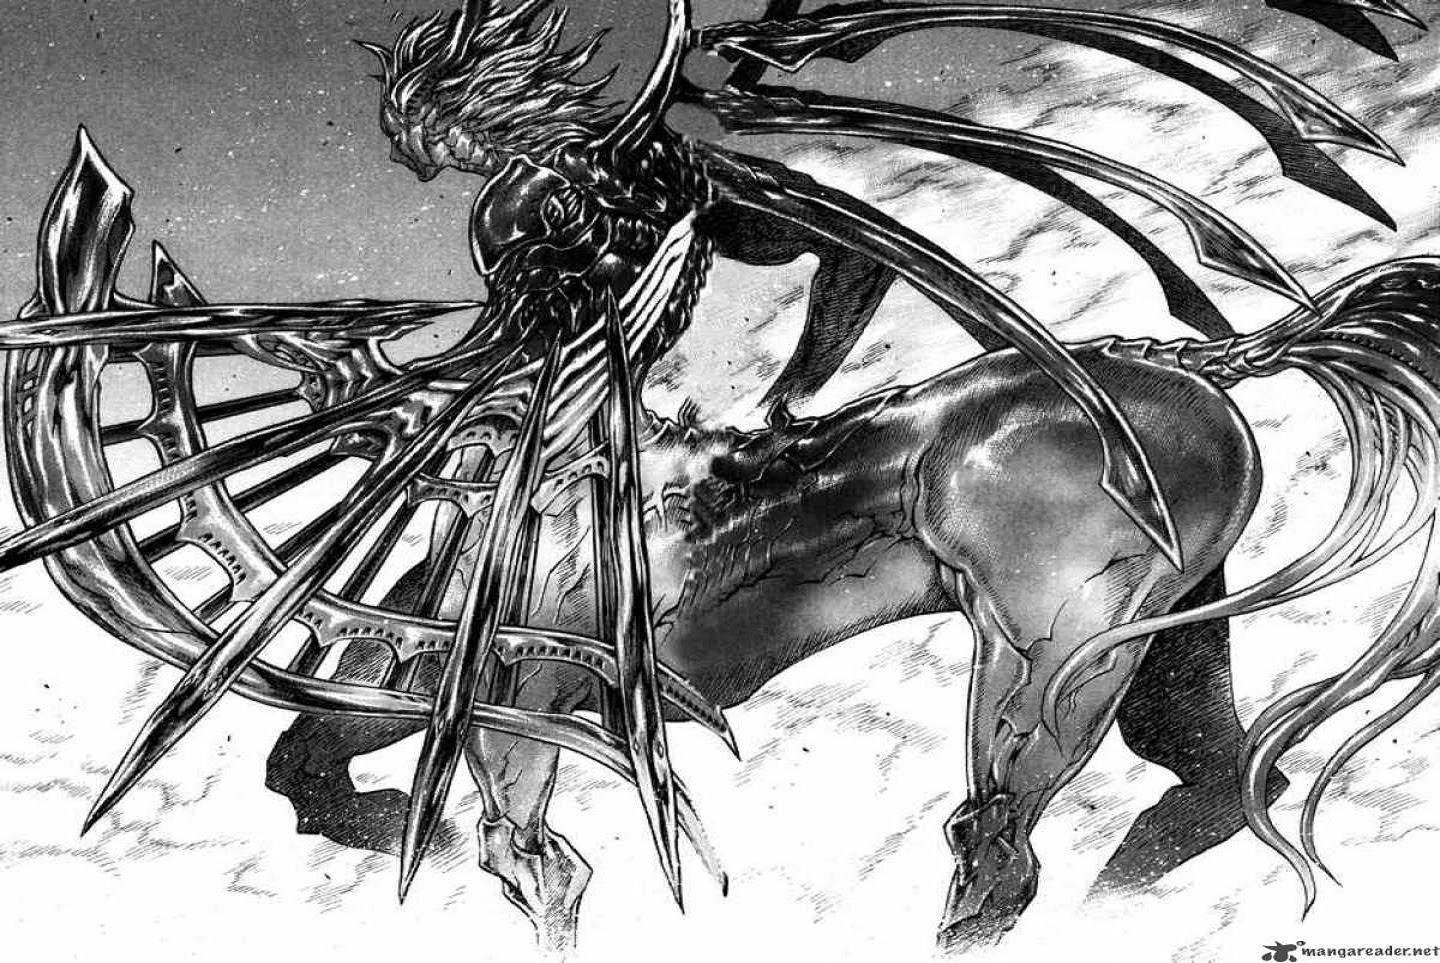 Top 20 Most Dark Manga of all Time